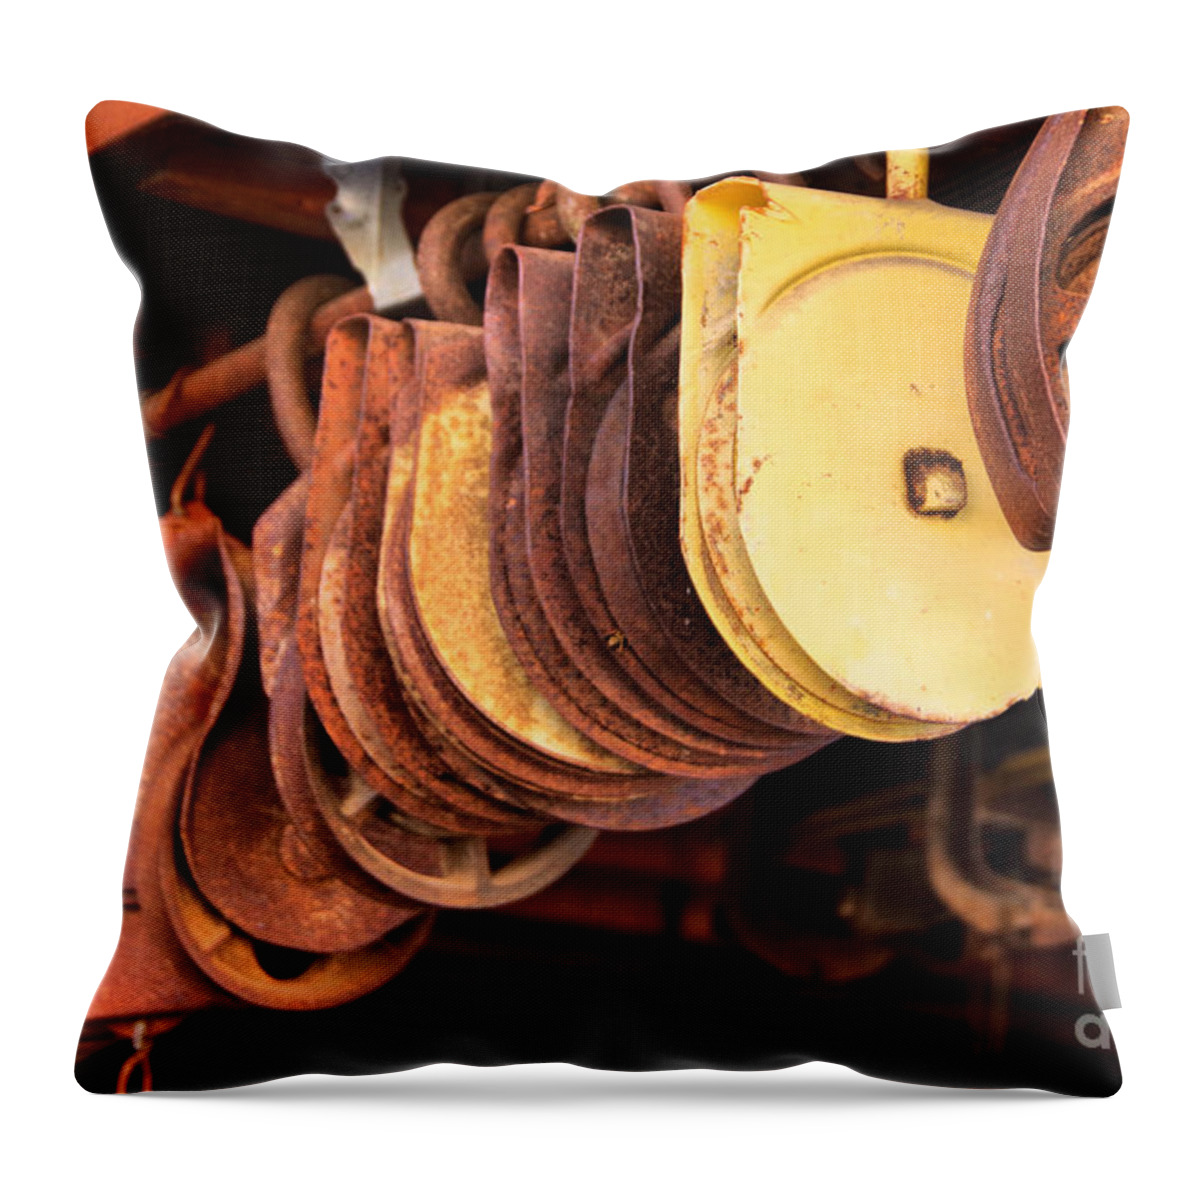 Pulleys Throw Pillow featuring the photograph Pulleys by Jeff Swan